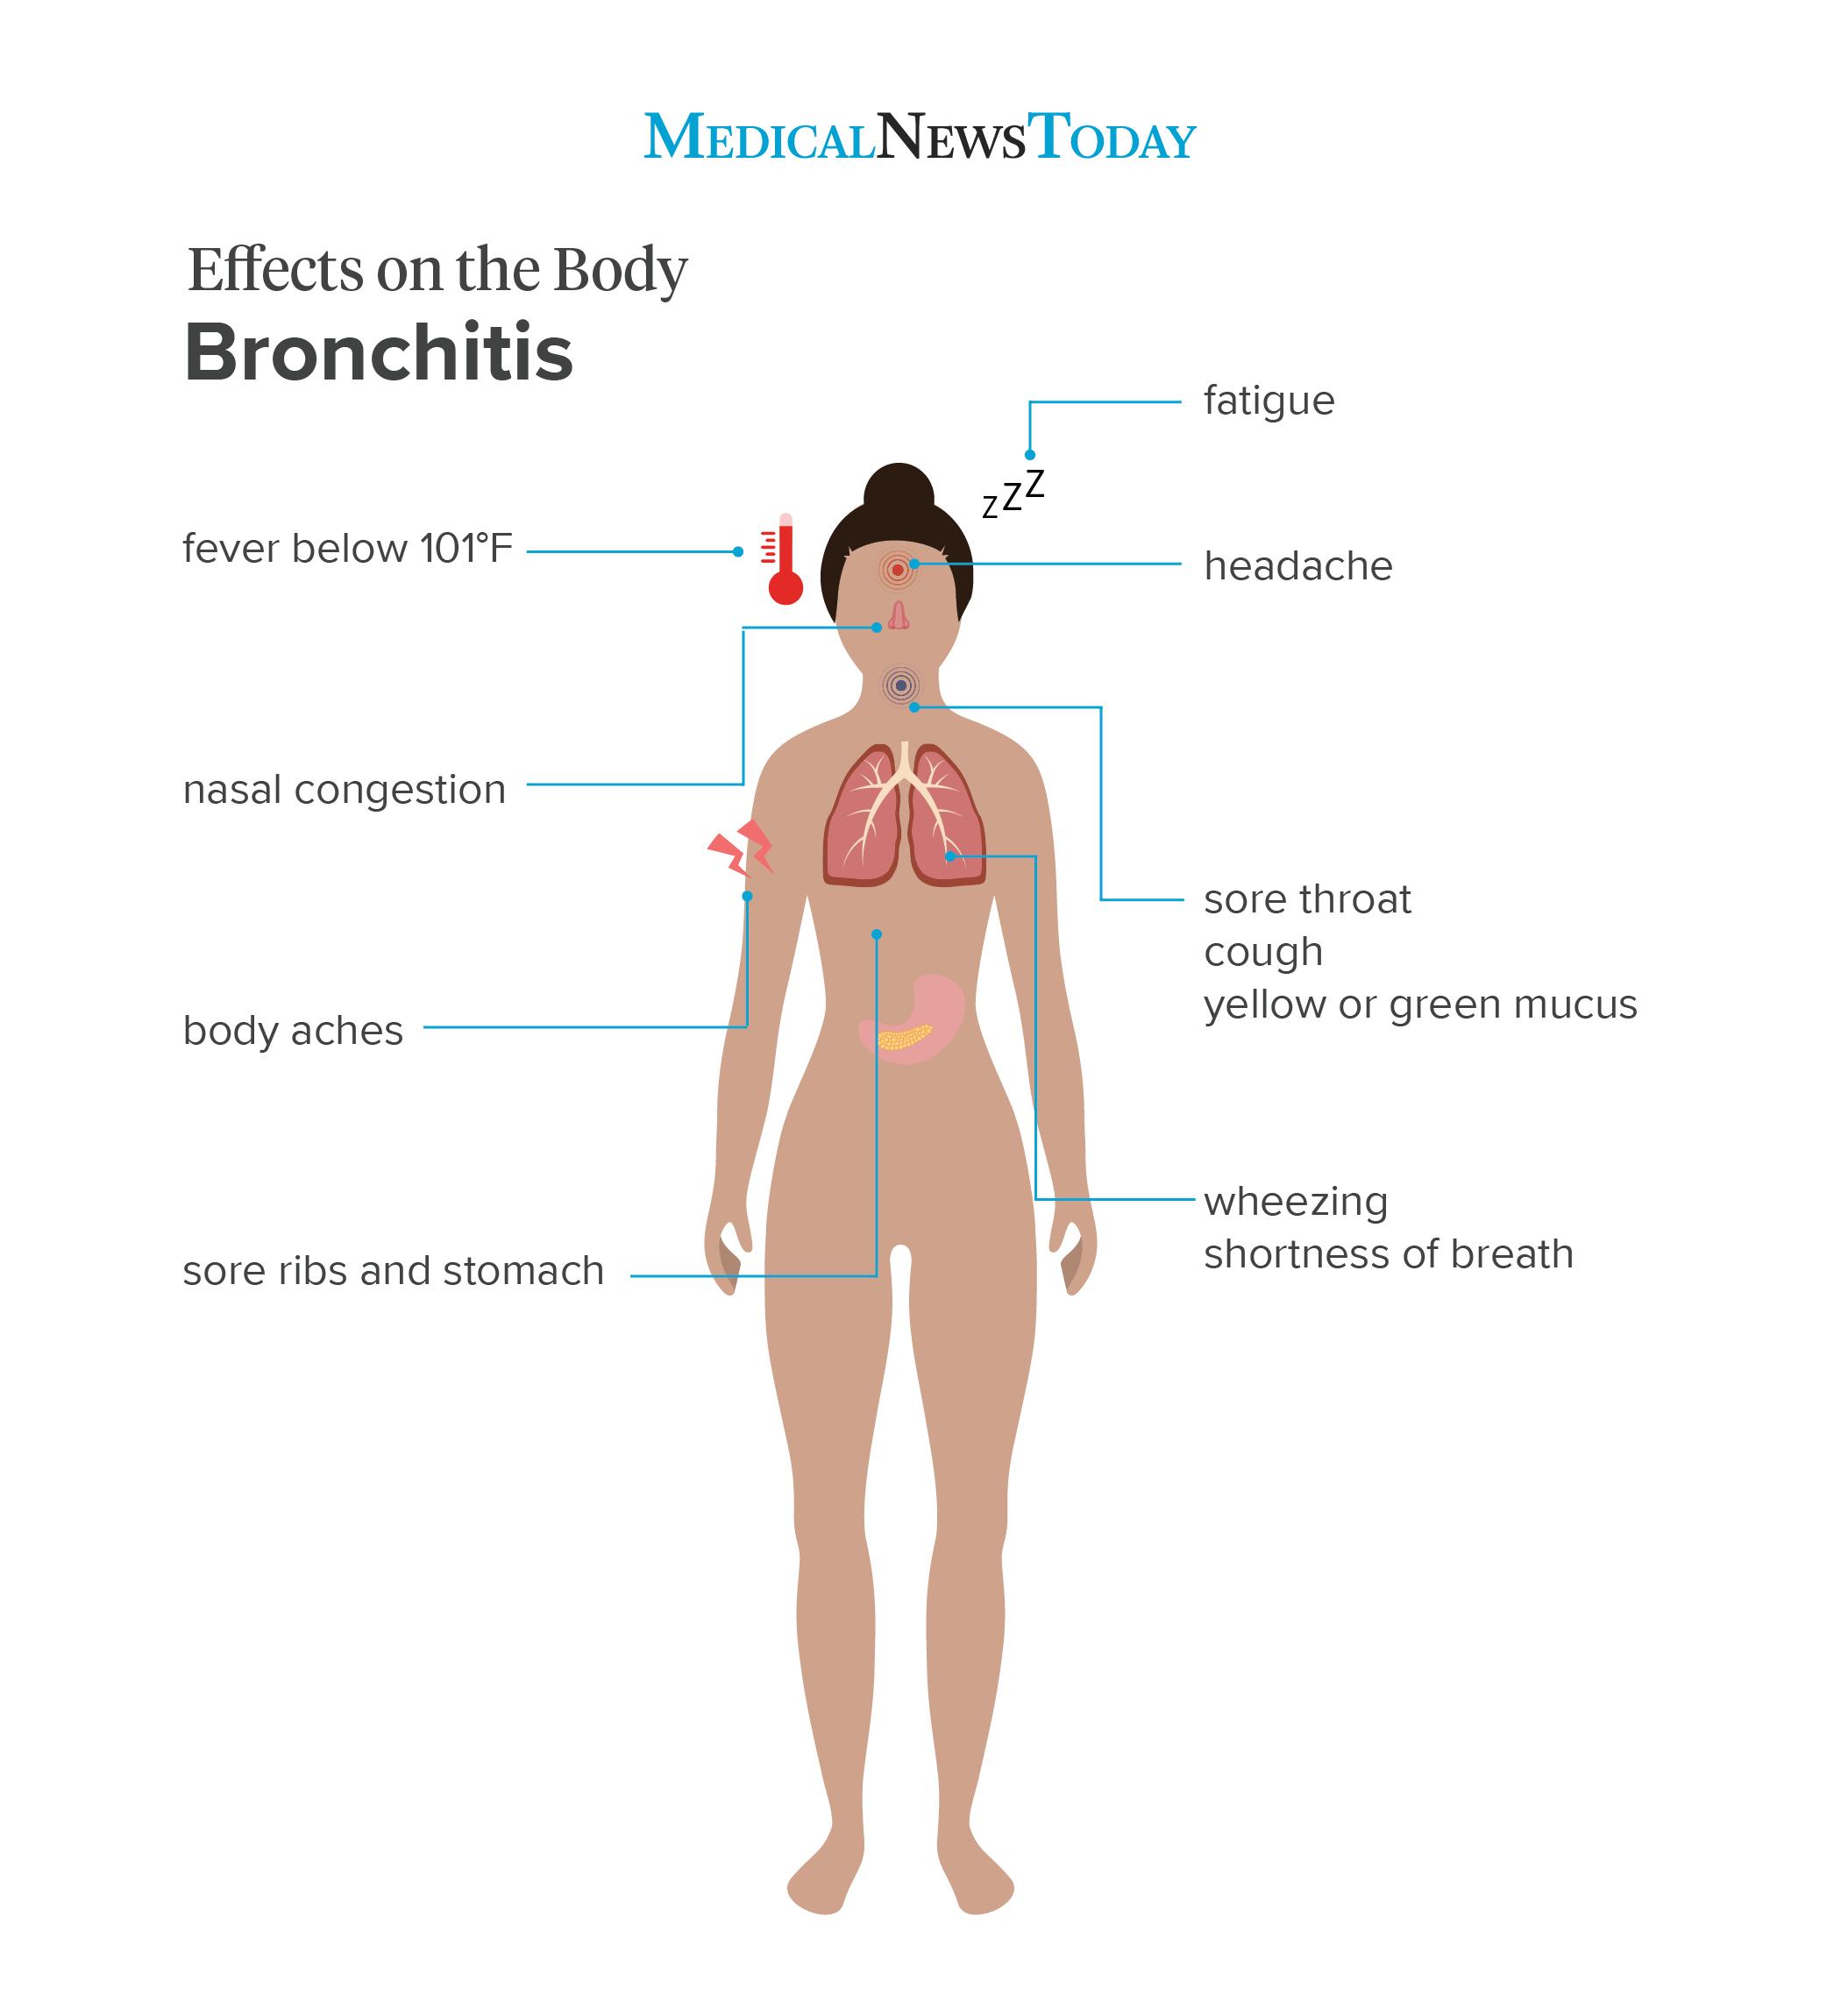 What are the symptoms of bronchitis?